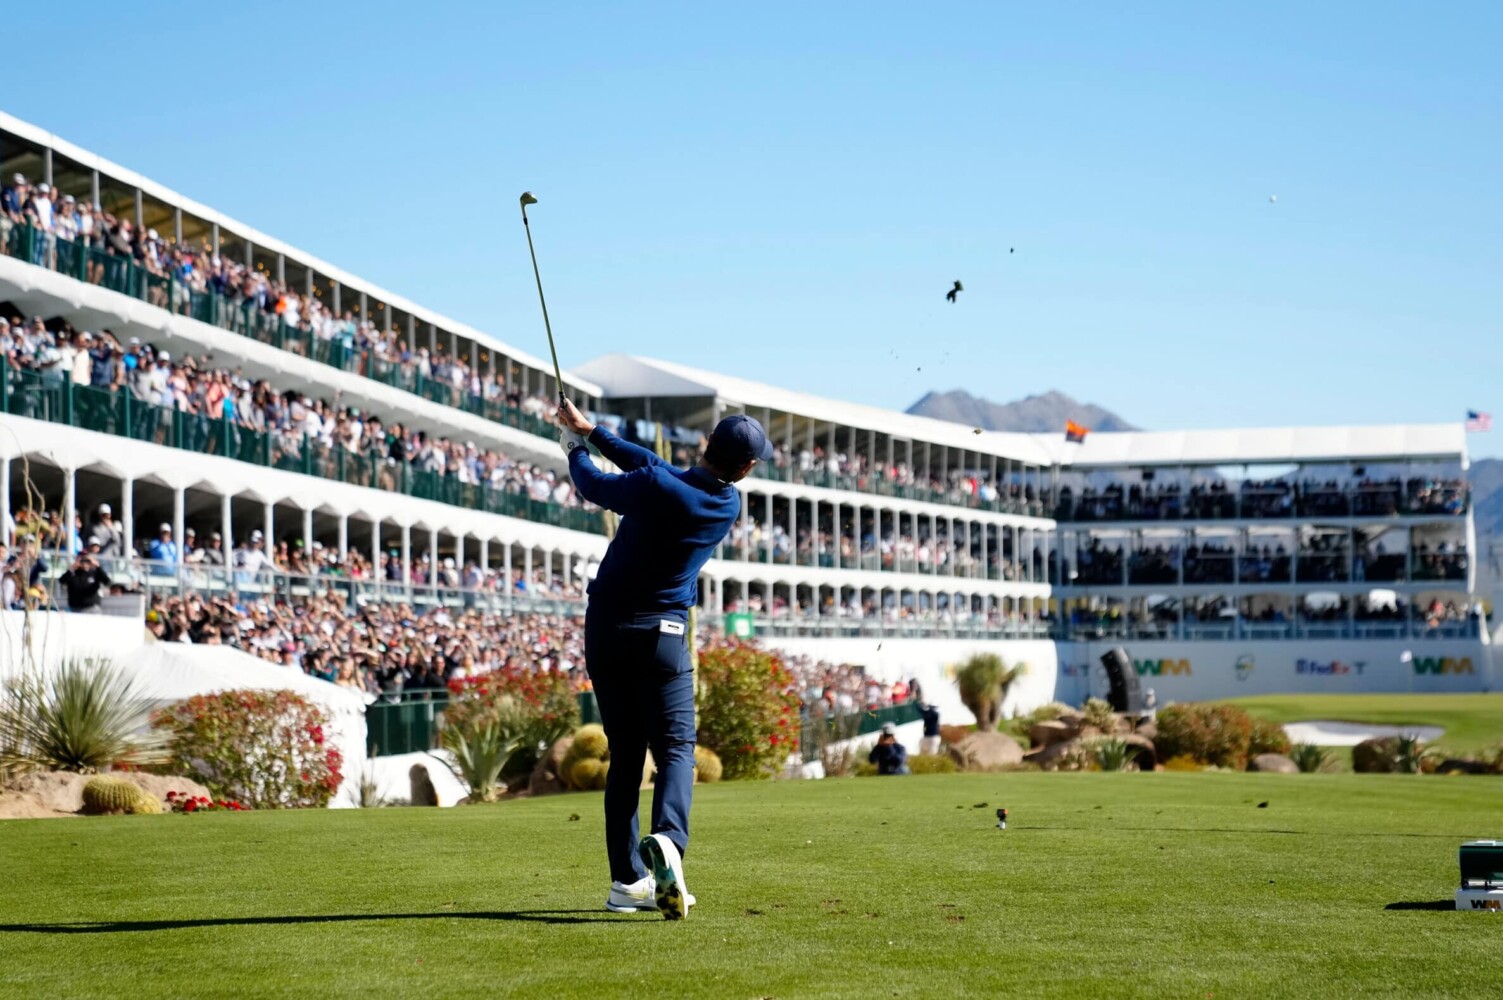 How The Phoenix Open Became a Golf Phenomenon